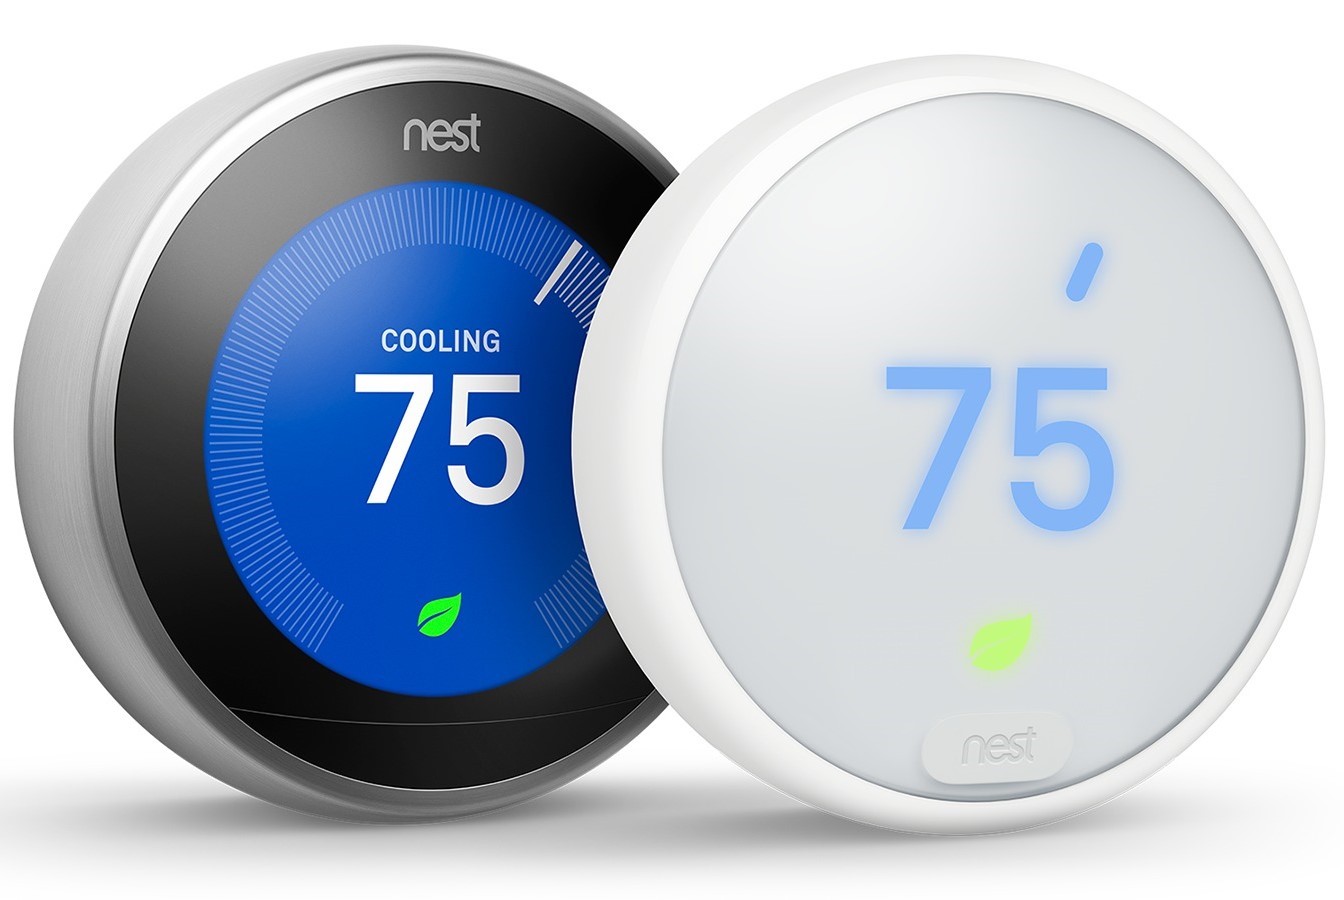 How Do I Control My Nest Thermostat